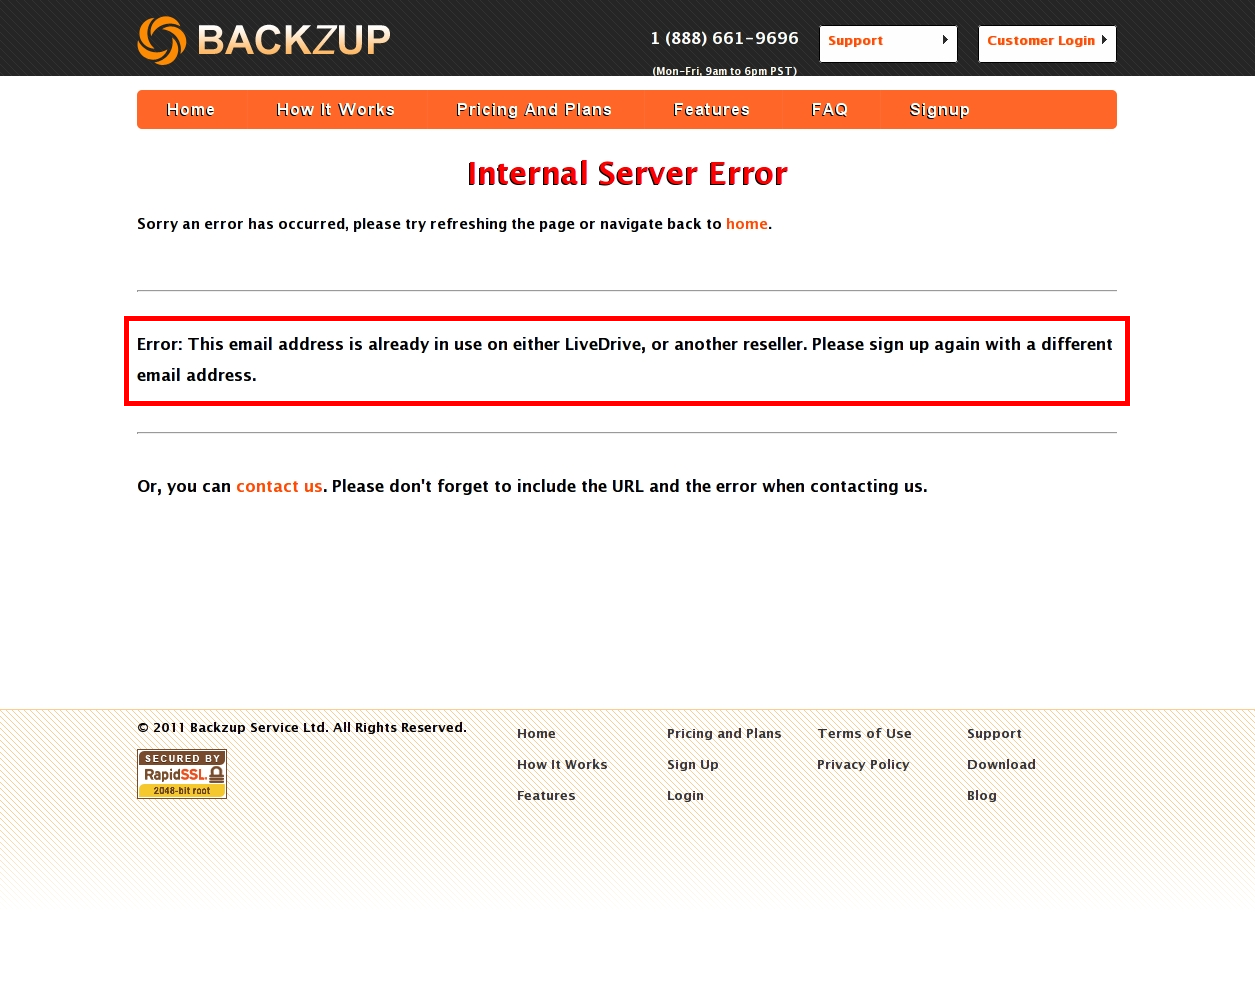 Free Online Backup Service, Backzup.com, Protecting Over 20,000 Computers